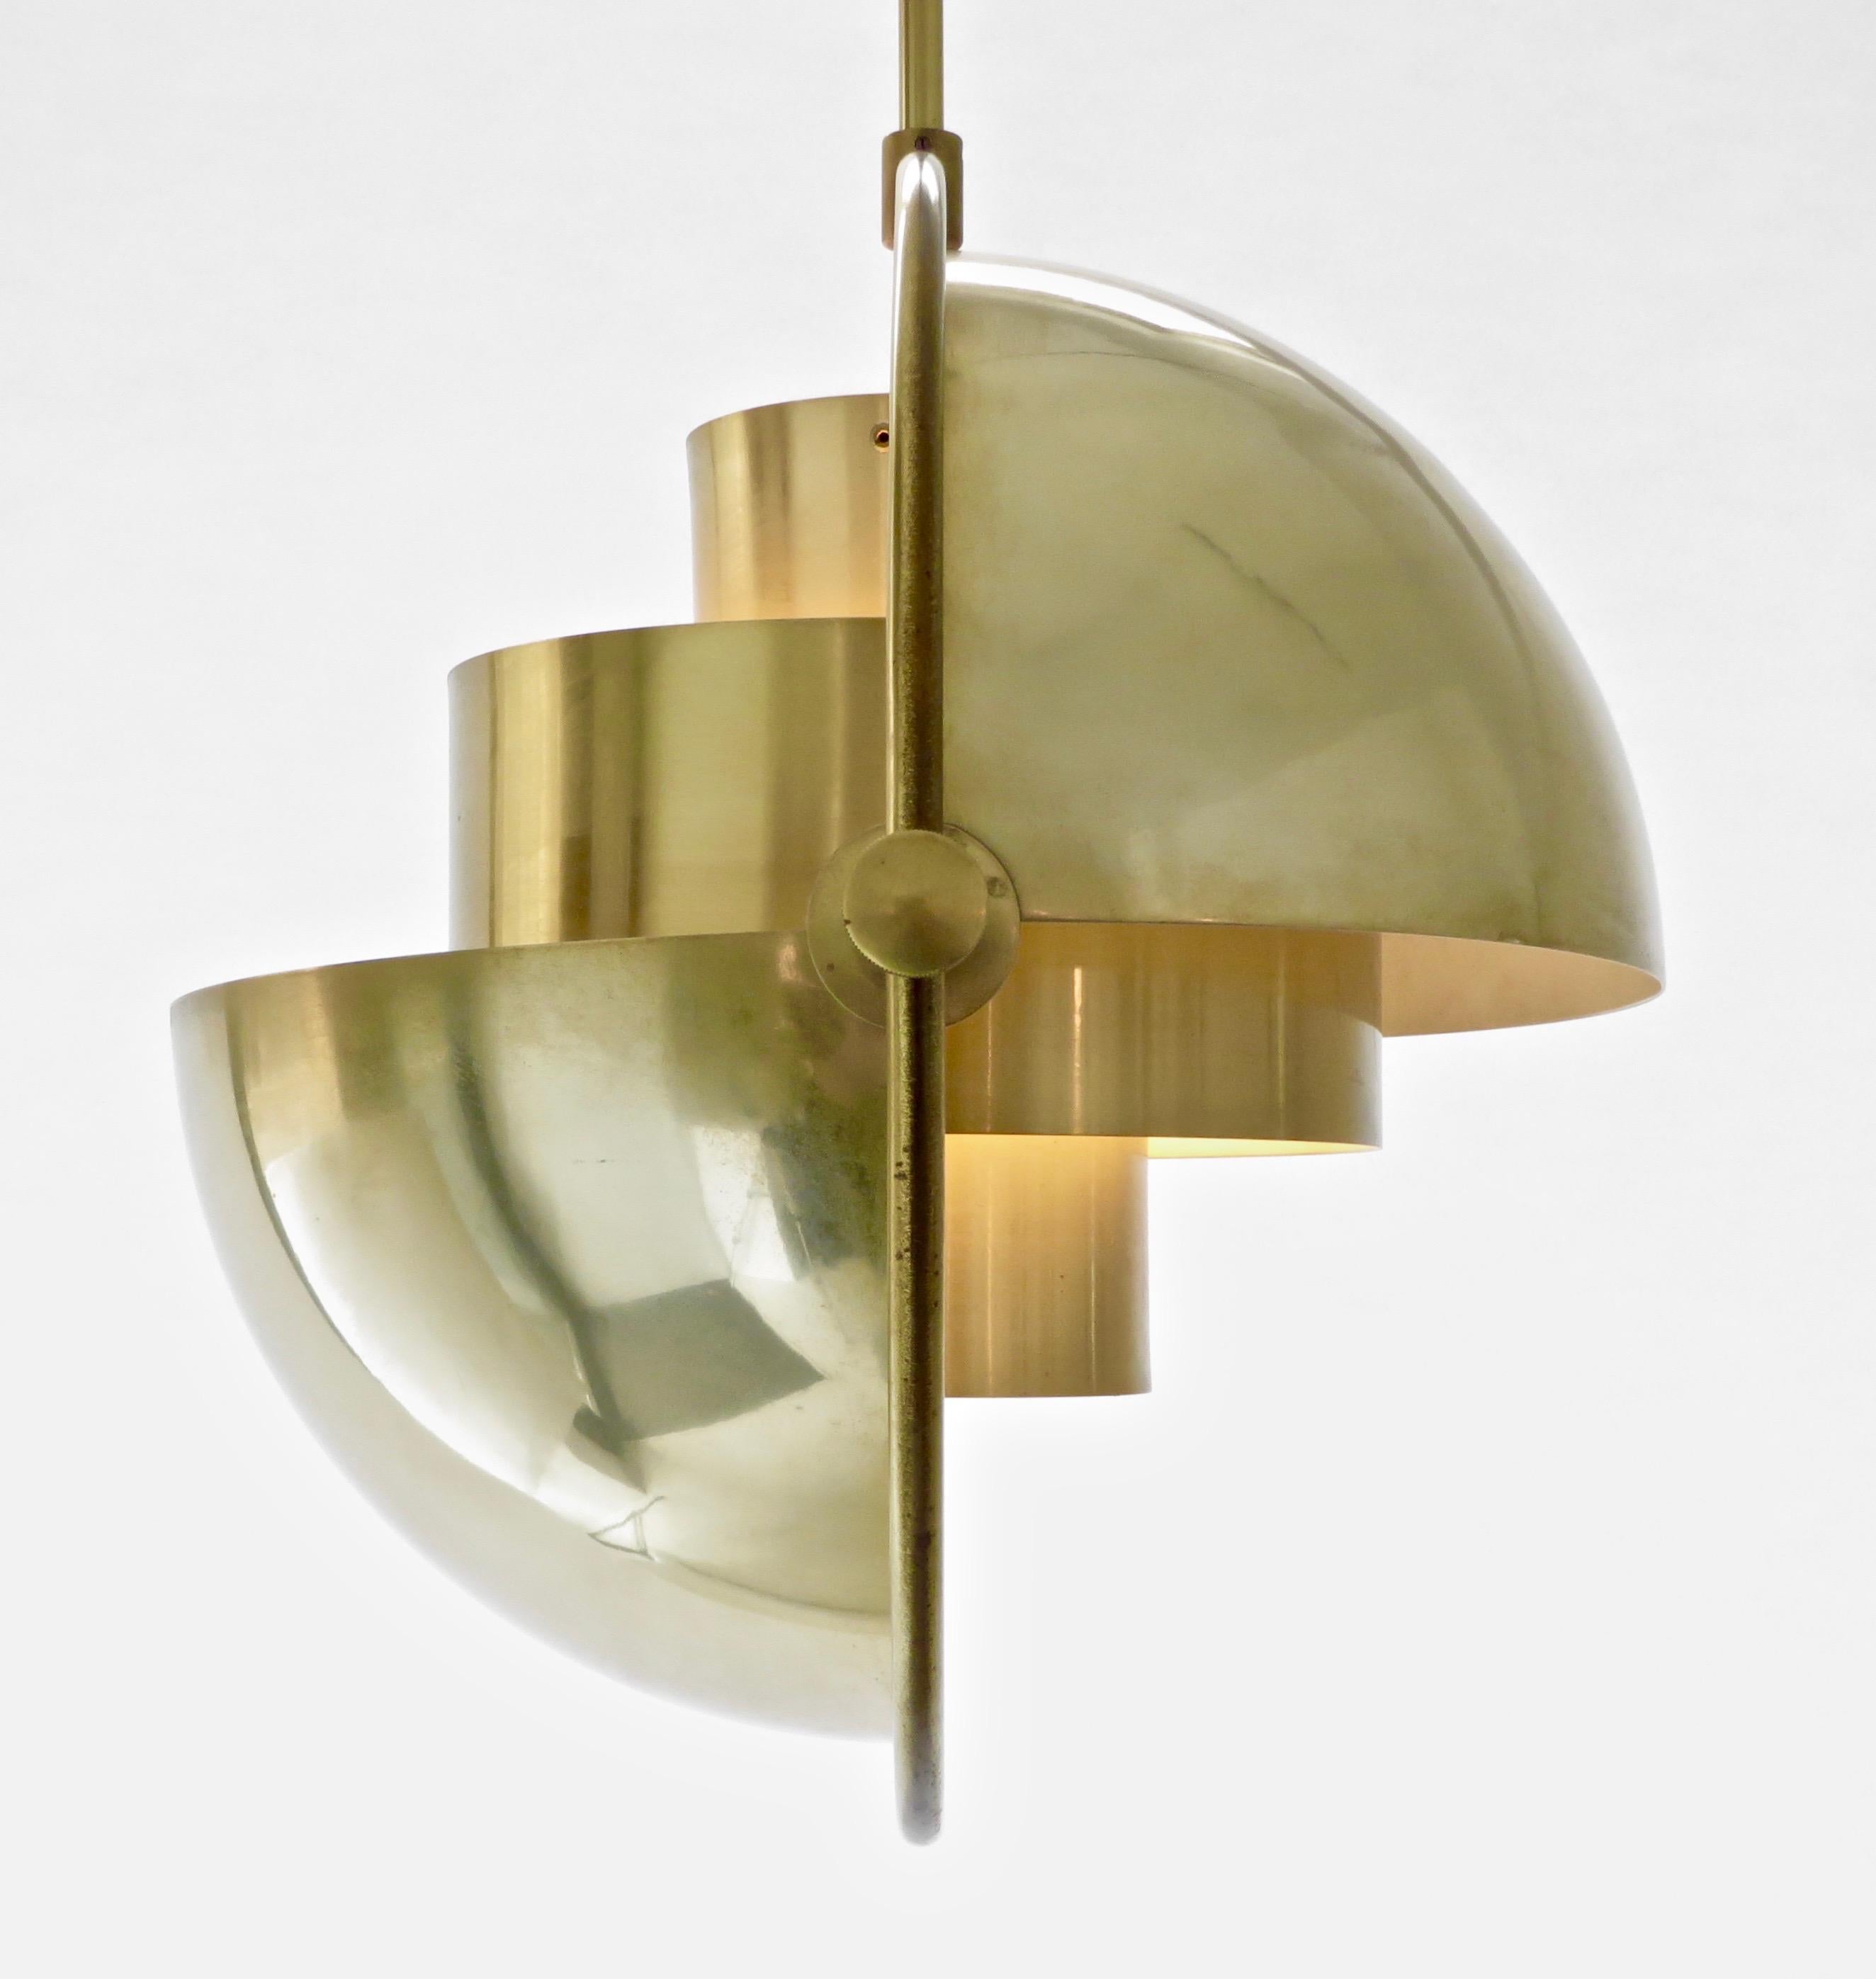 Brass vintage multi-lite pendant by Louis Weisdorf for Lyfa Denmark.
Rewired for USA. Single light source. Bulb up to 120 W.
The pendants have their original label Lyfa and are not reproductions. 
The core of the multi-lite is a two-cylinder form